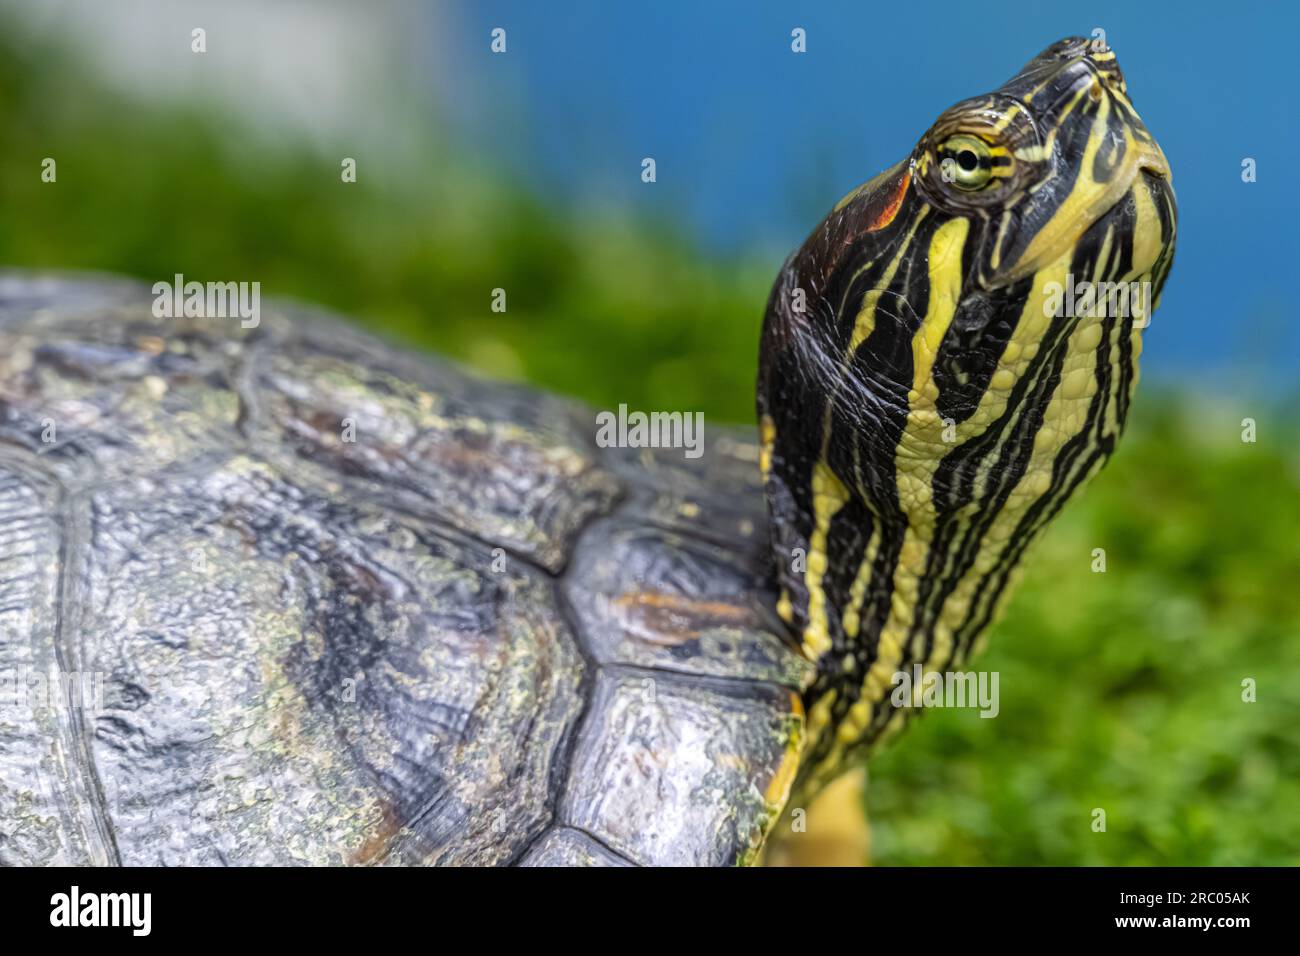 A Red Eared Slider turtle at the Nature Center on Amelia Island in Northeast Florida. (USA) Stock Photo